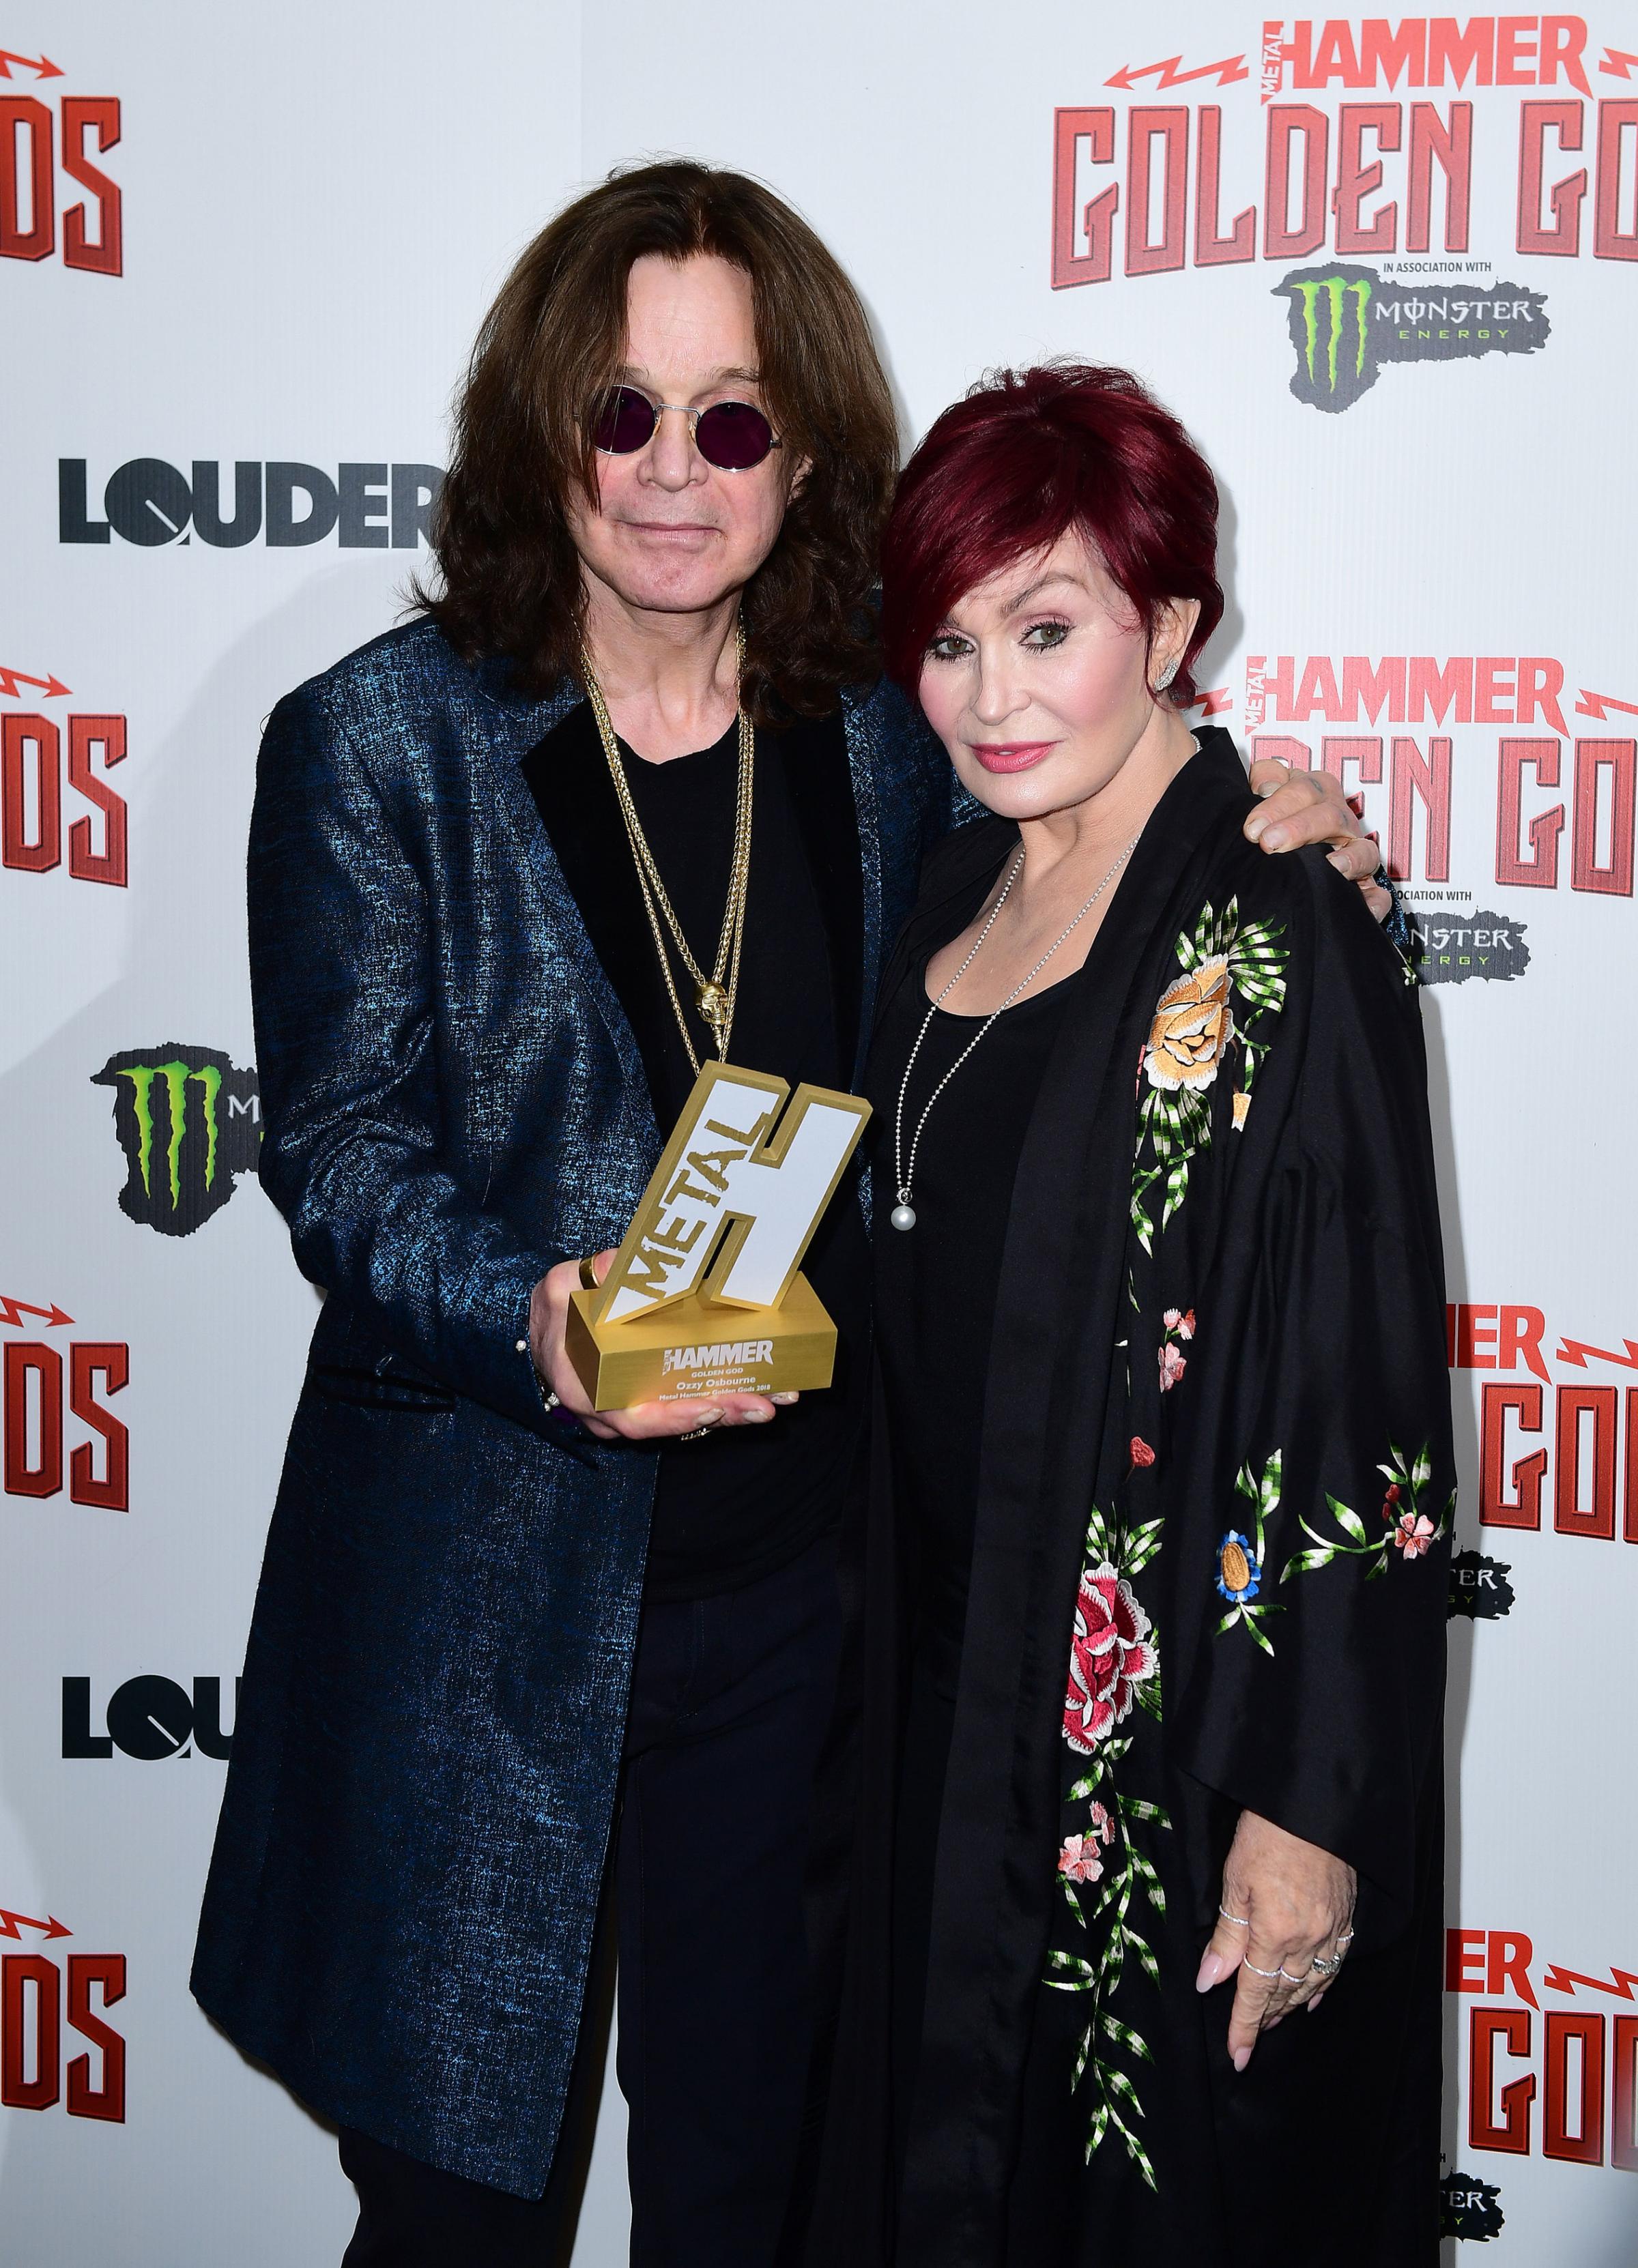 Ozzy Osbourne with his Golden God award and wife Sharon Osbourne in the press room at the Metal Hammer Golden Gods Awards 2018 held at indigo at The O2 in London in June 2018 (Ian West/PA Photos)